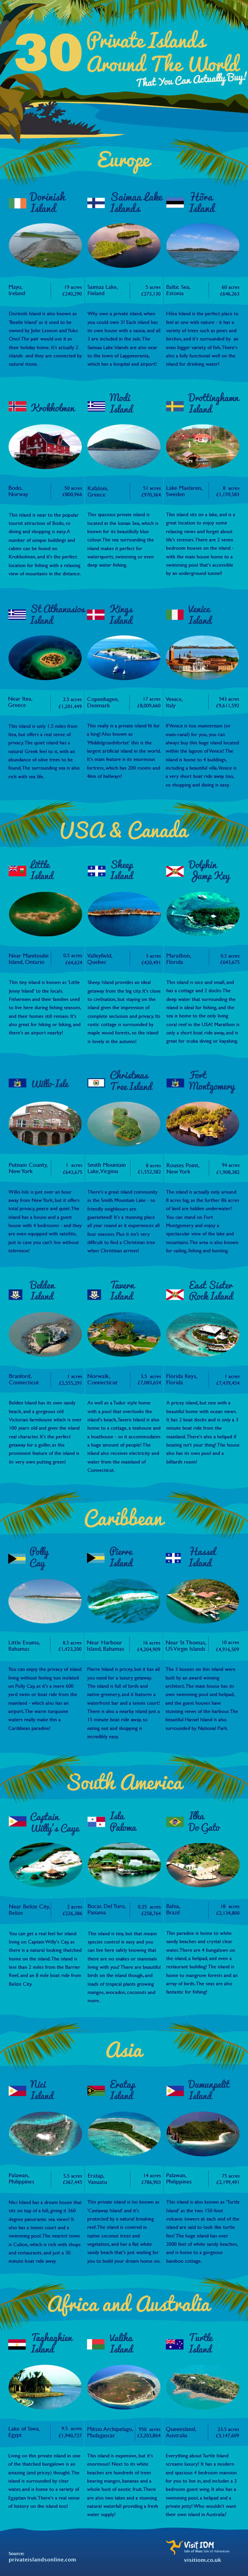 30 Private Islands You Can Actually Buy!